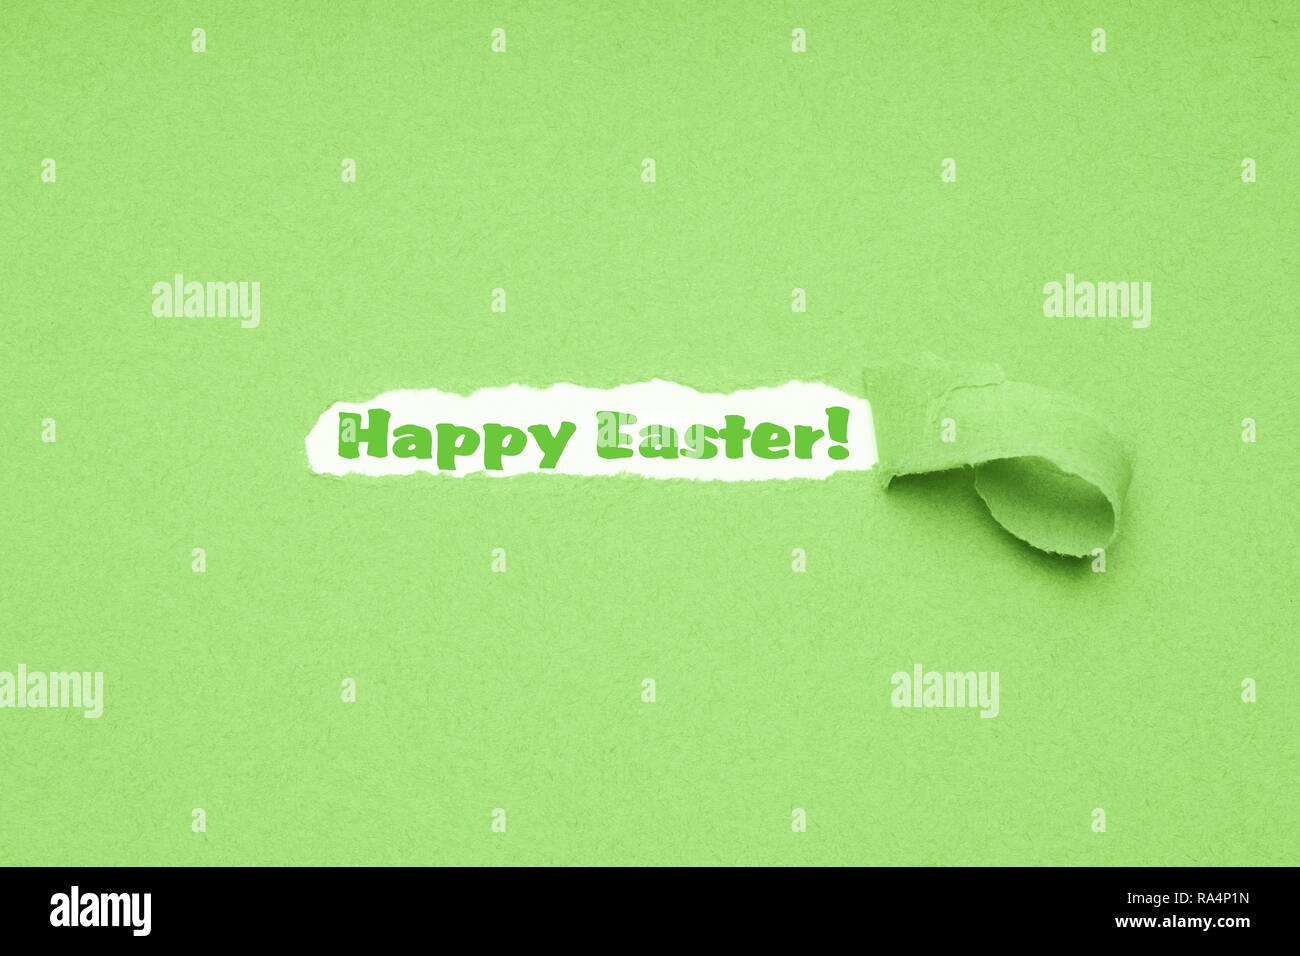 hole torn in green paper background to reveal Happy Easter greeting Stock Photo